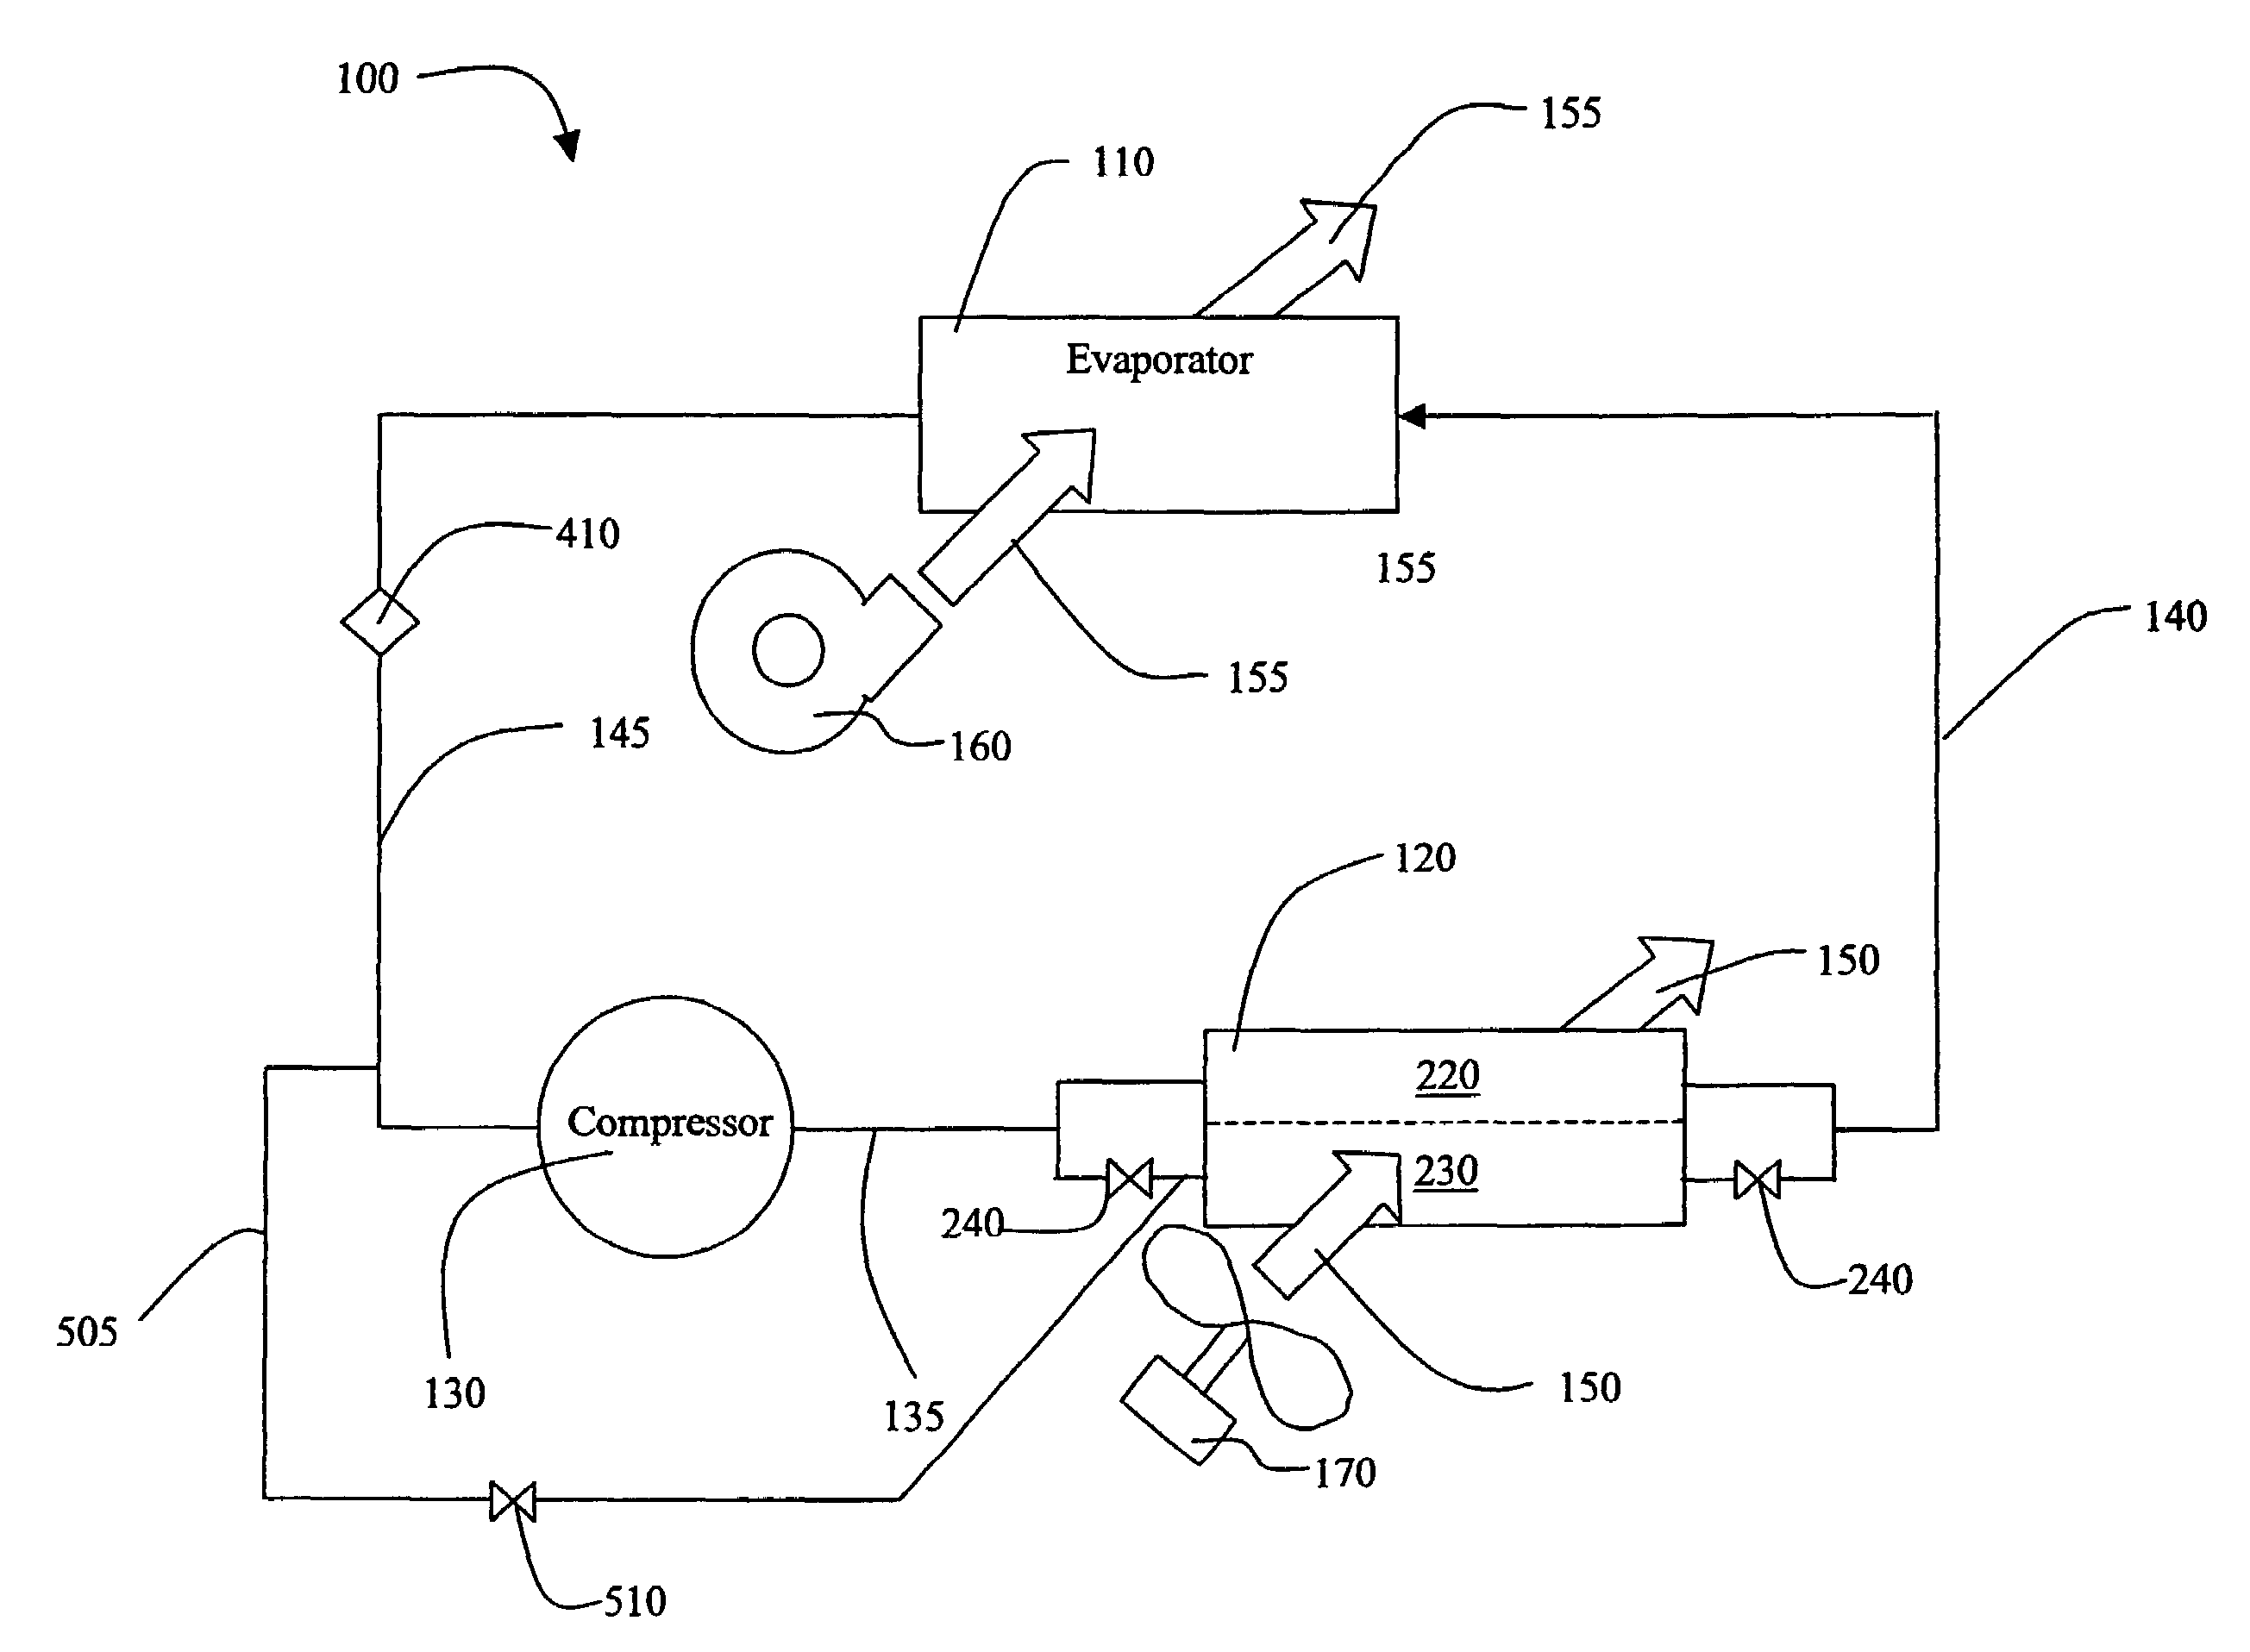 Method for refrigerant pressure control in refrigeration systems